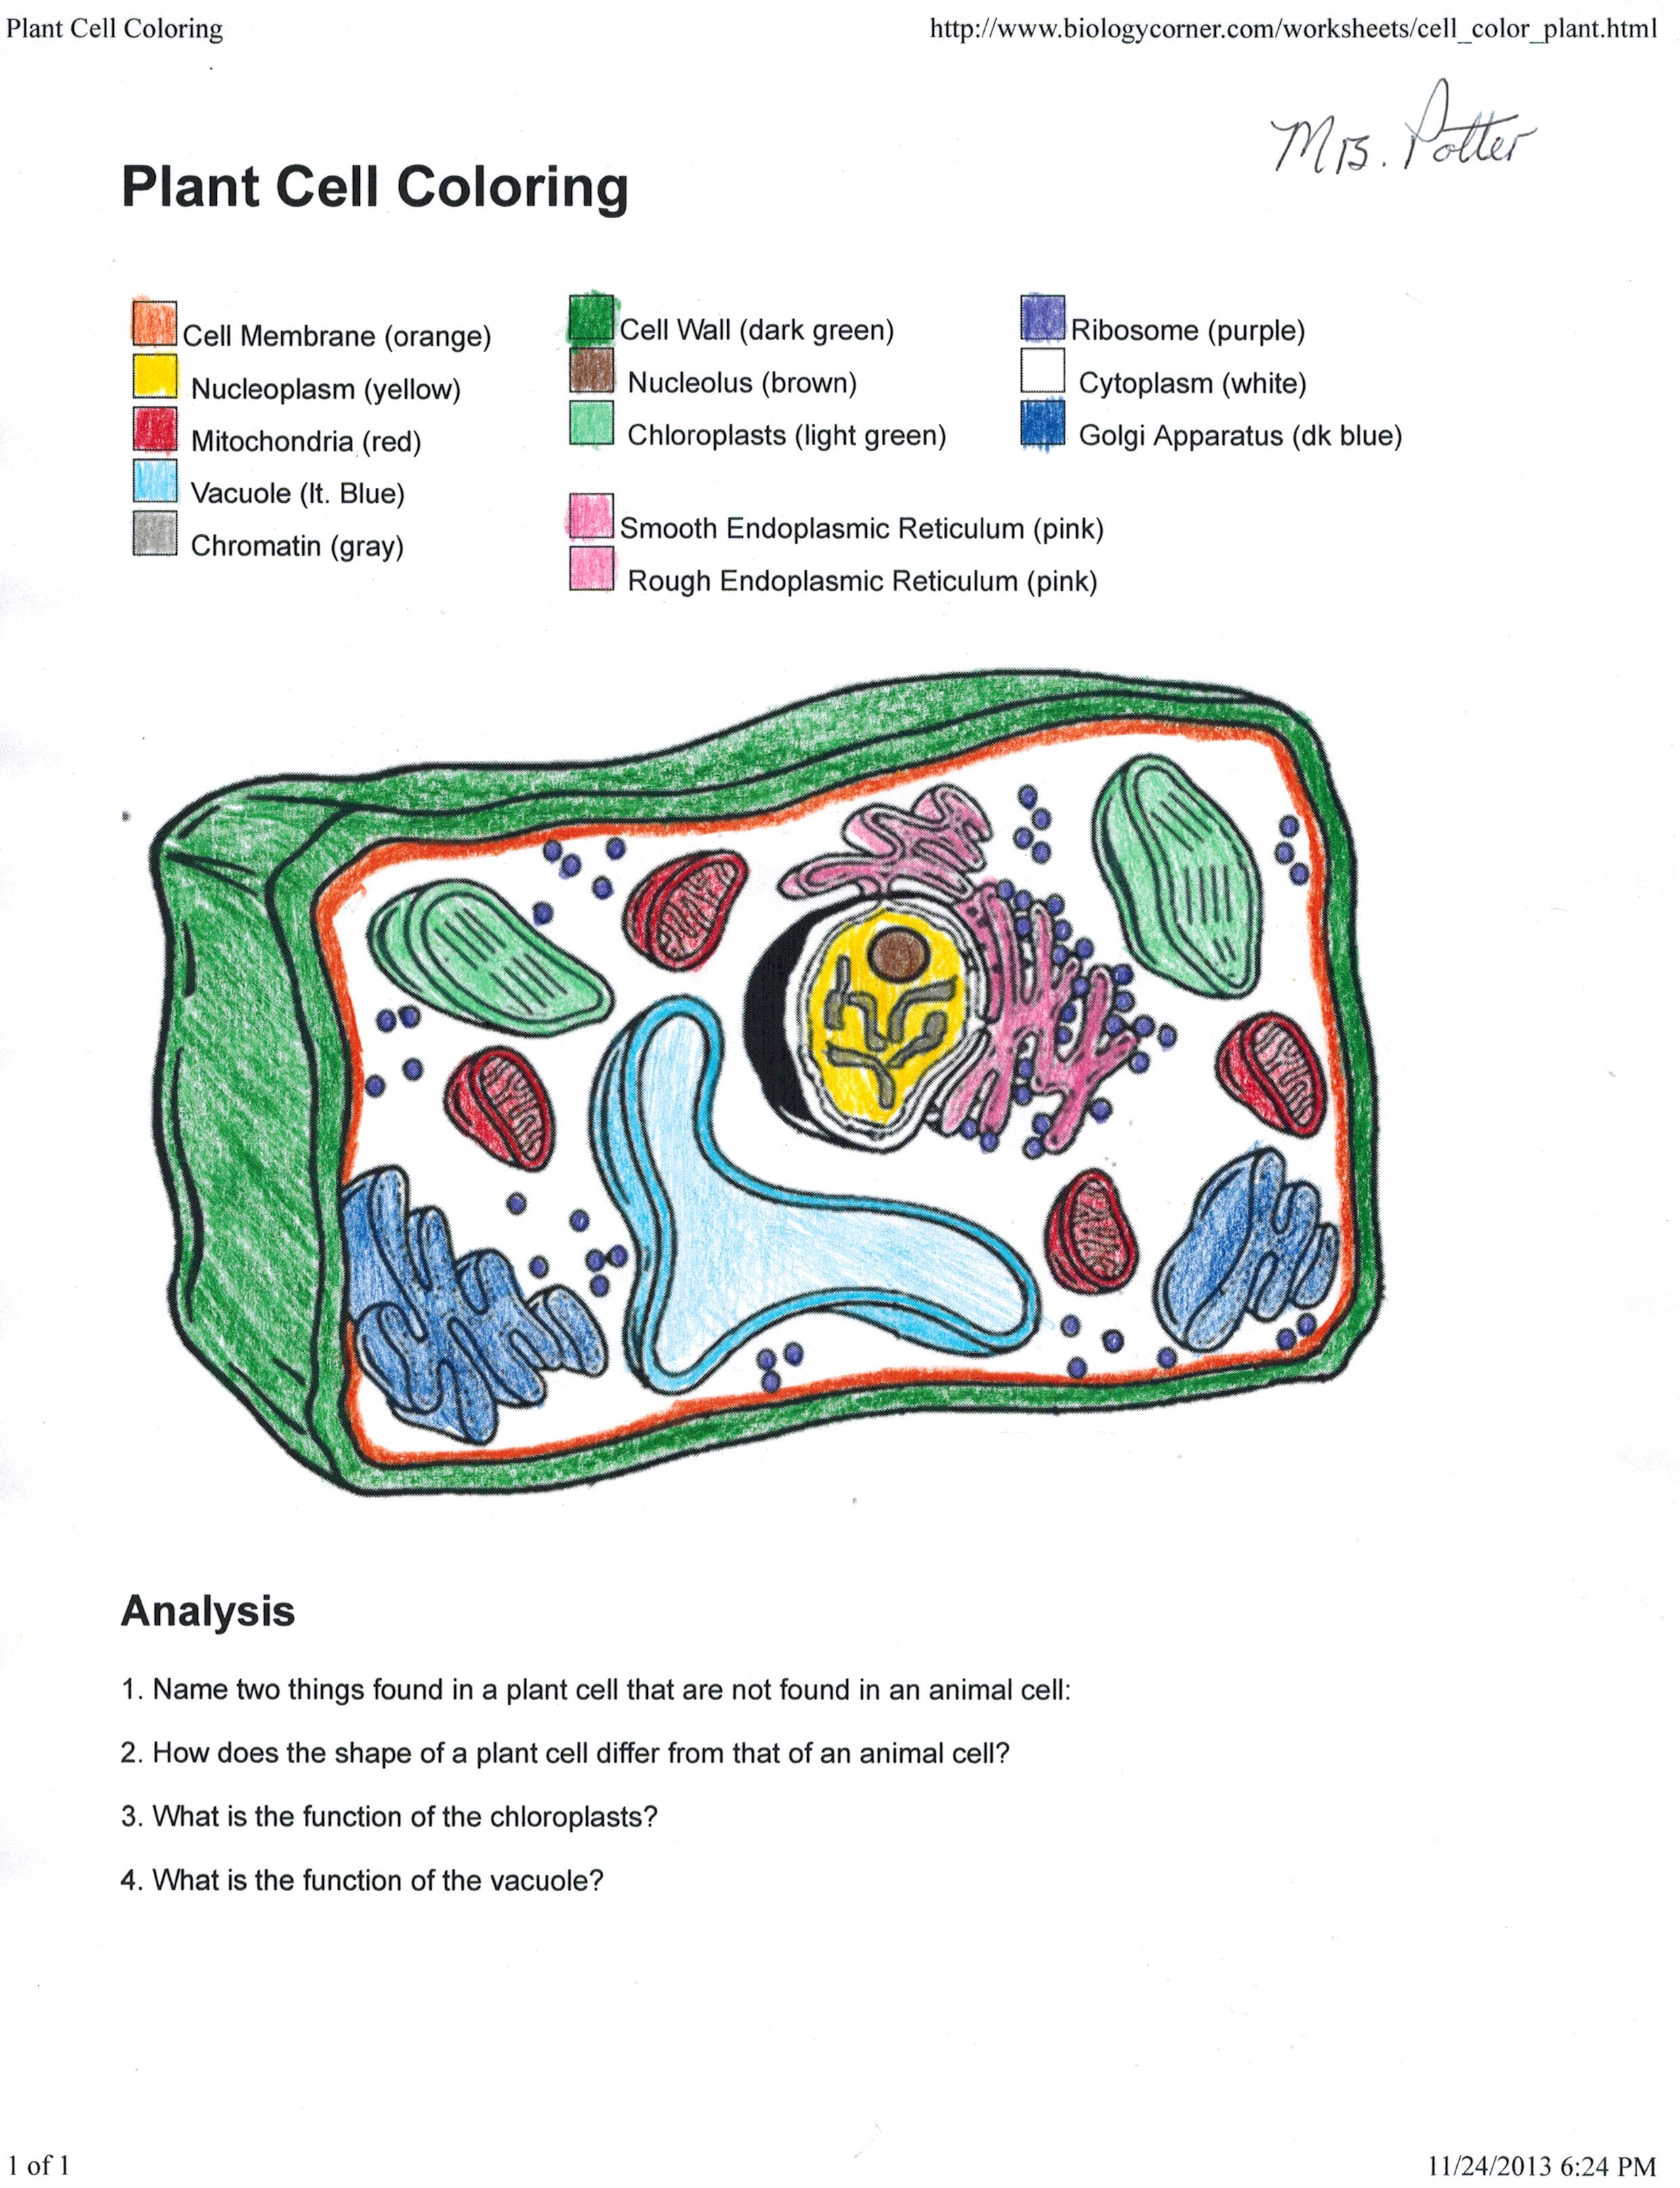 Plant Cell Coloring Page 1